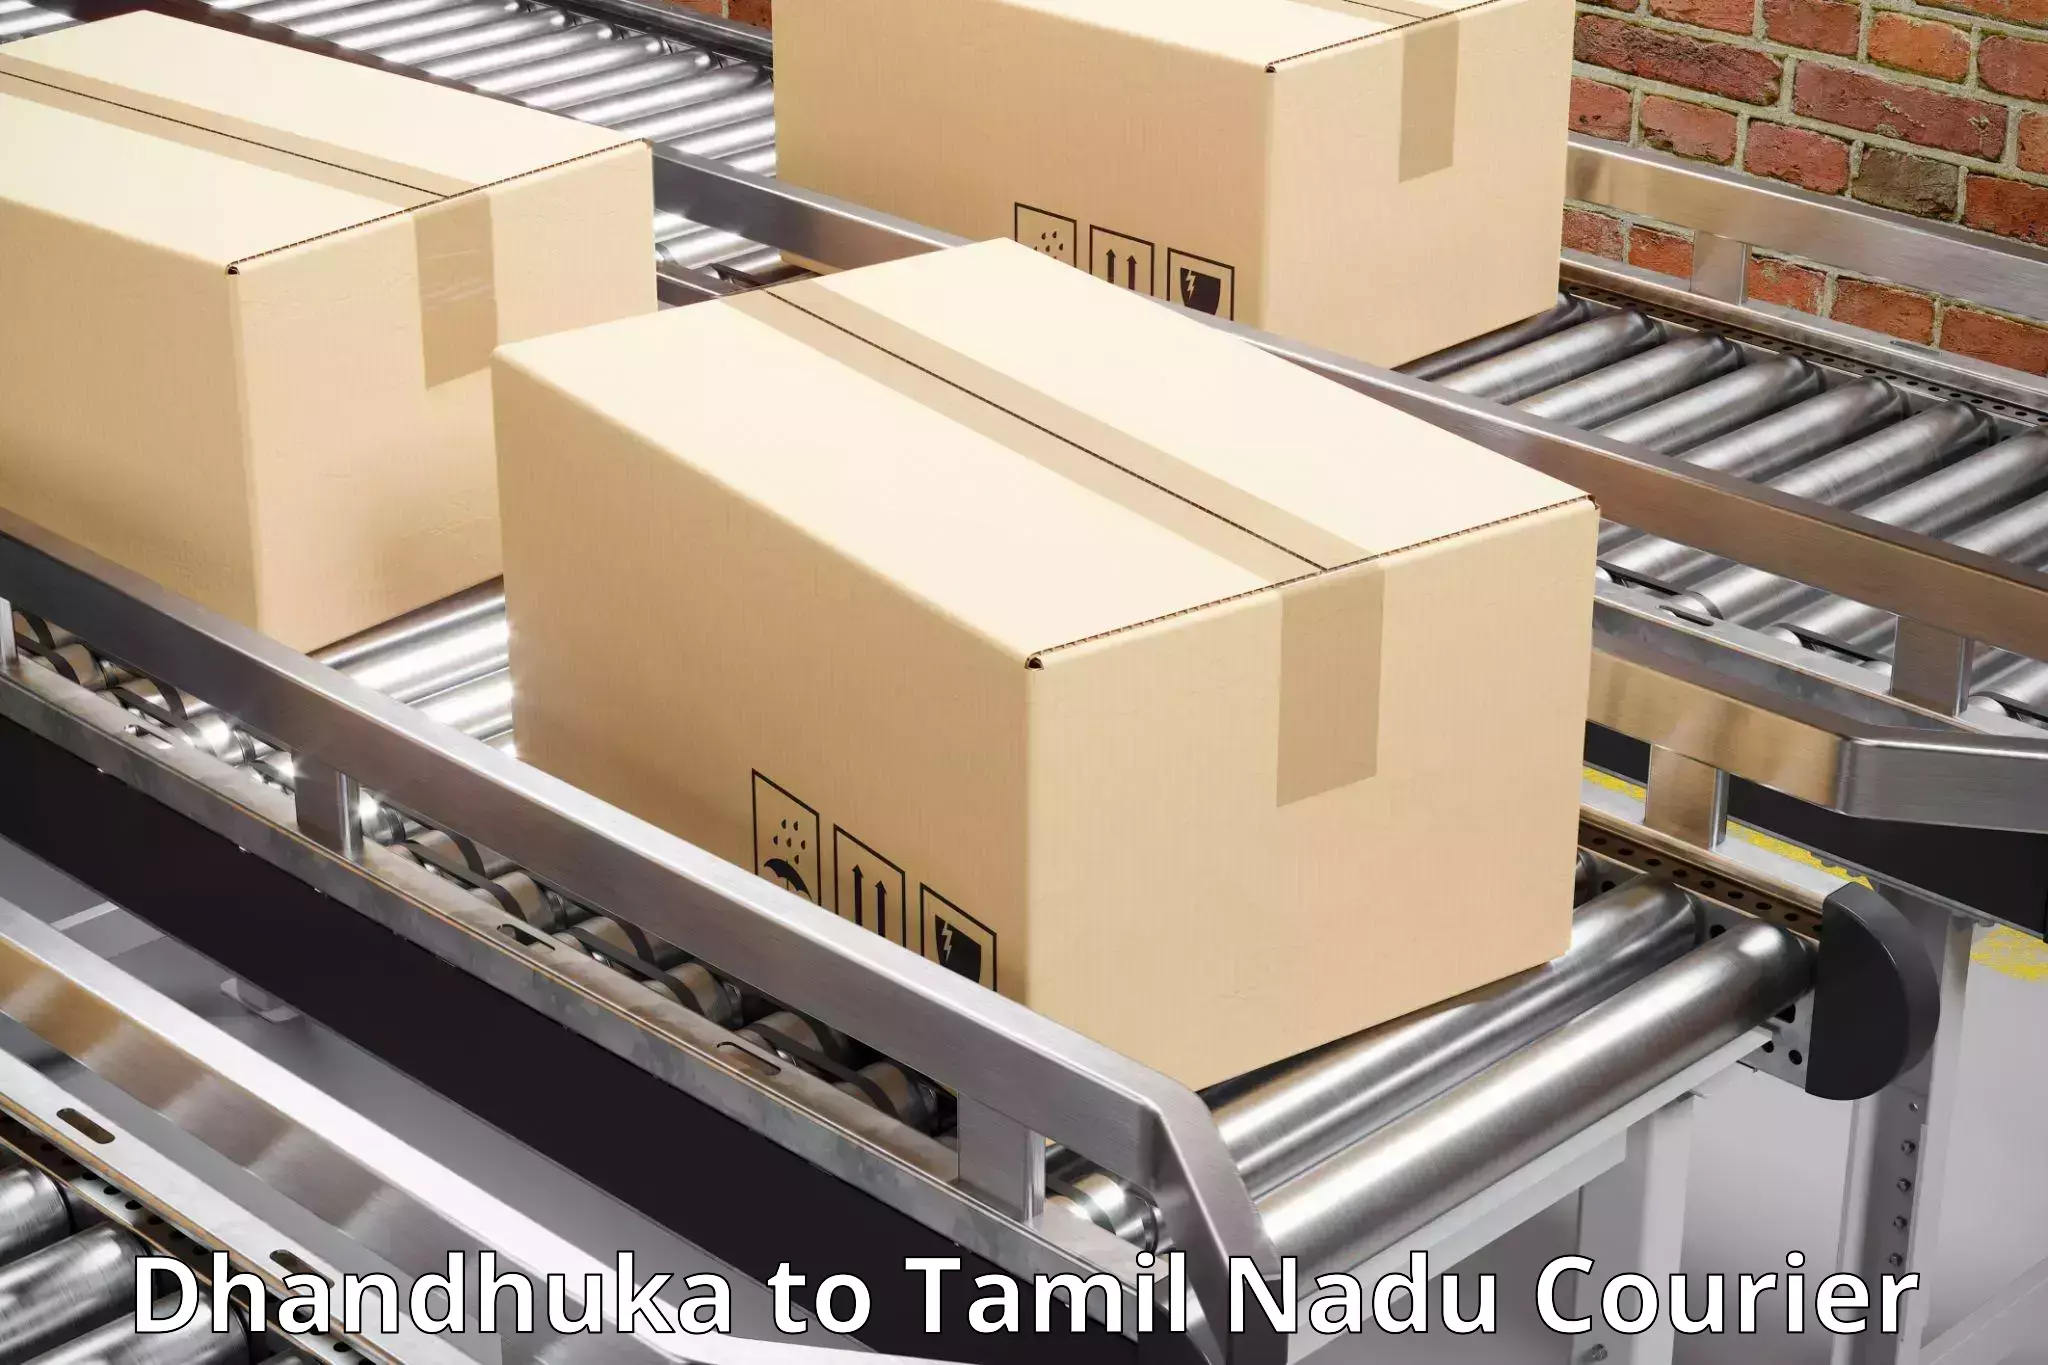 Expedited parcel delivery Dhandhuka to Mettala